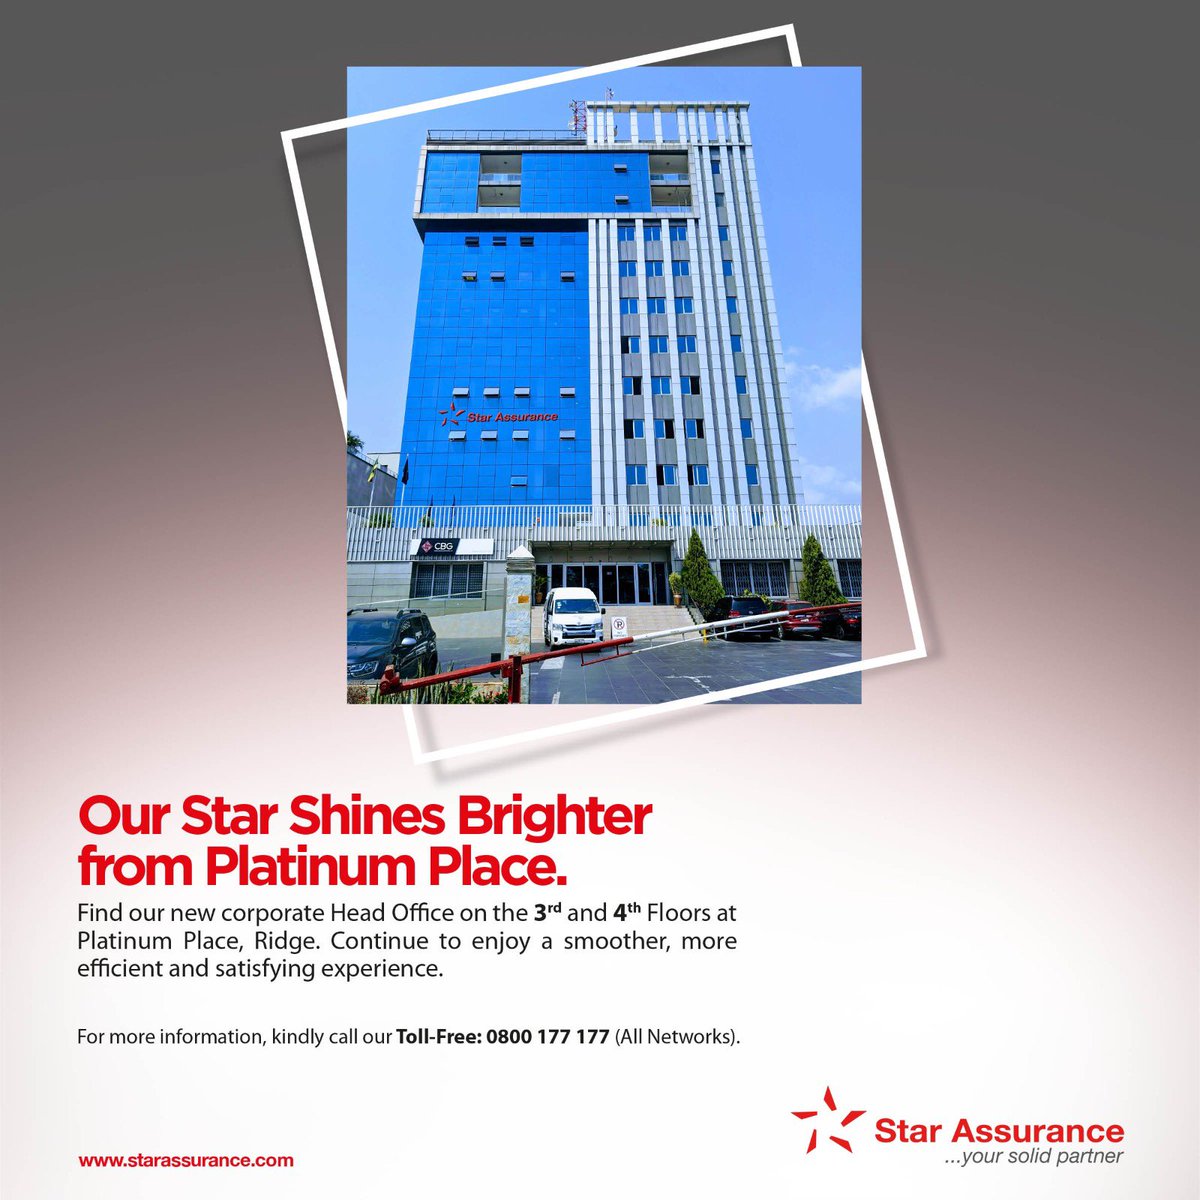 Star Assurance is closer to you!

Find their new corporate Head Office on the 3rd and 4th Floors at Platinum Place, Ridge. Continue to enjoy a smoother, more efficient and satisfying experience.

#StarAssurance